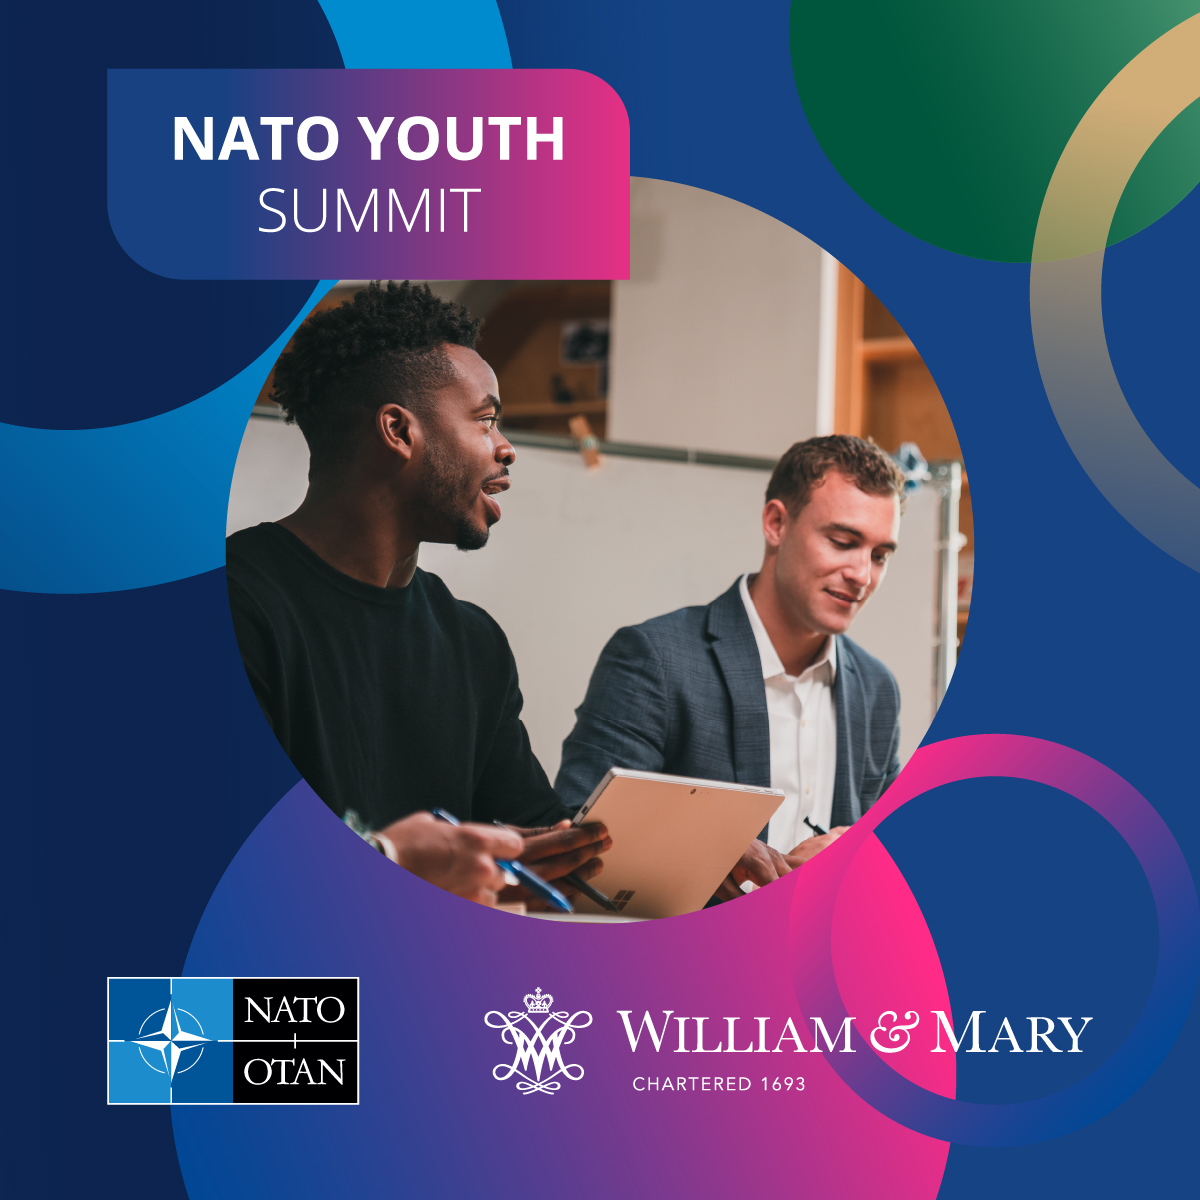 NATO Youth Summit - Two people engaged in conversation - NATO/OTAN and William &amp; Mary